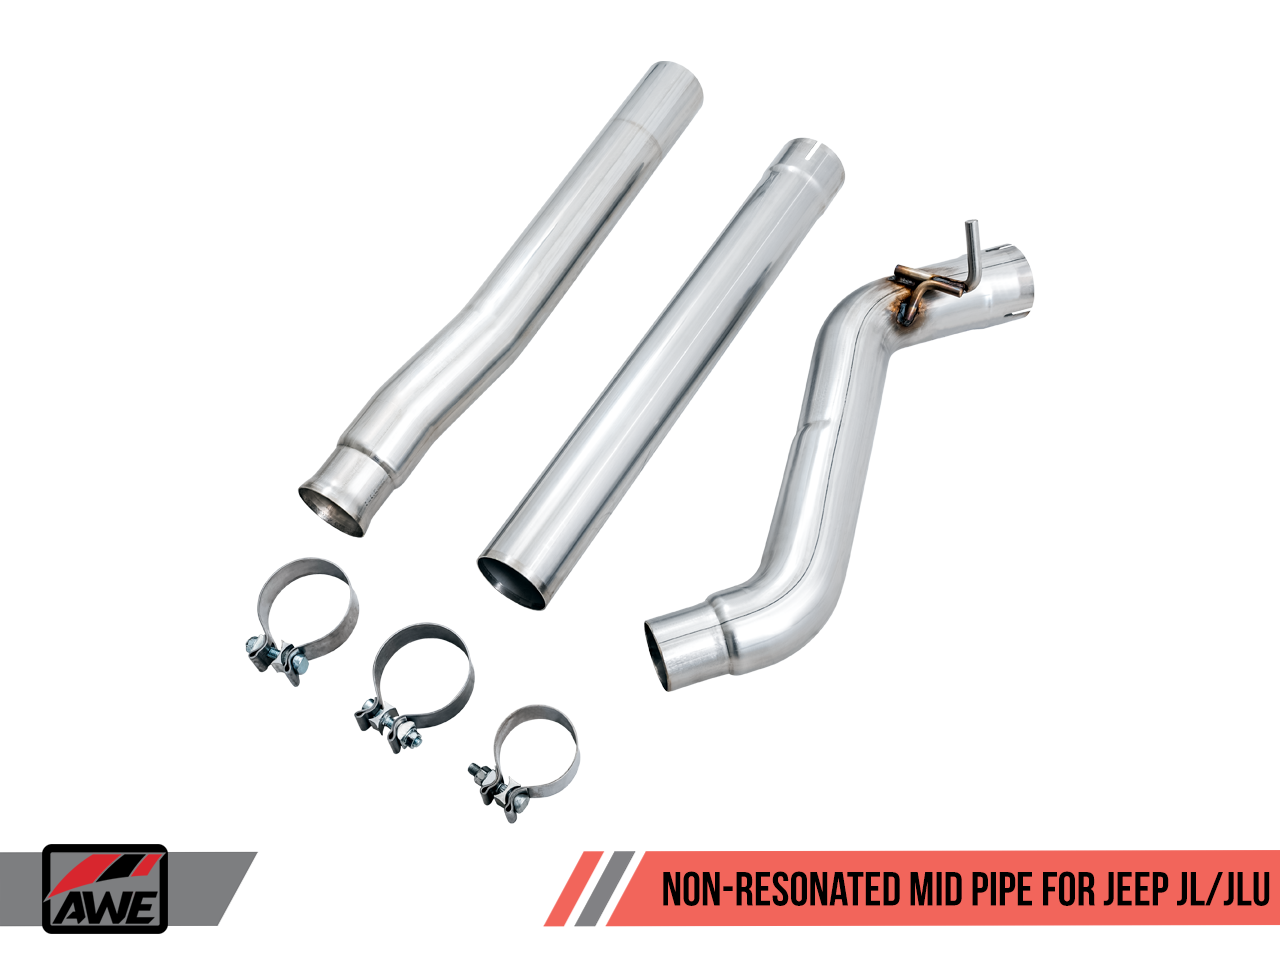 AWE Non-Resonated Mid Pipe for Jeep JL/JLU 2.0T